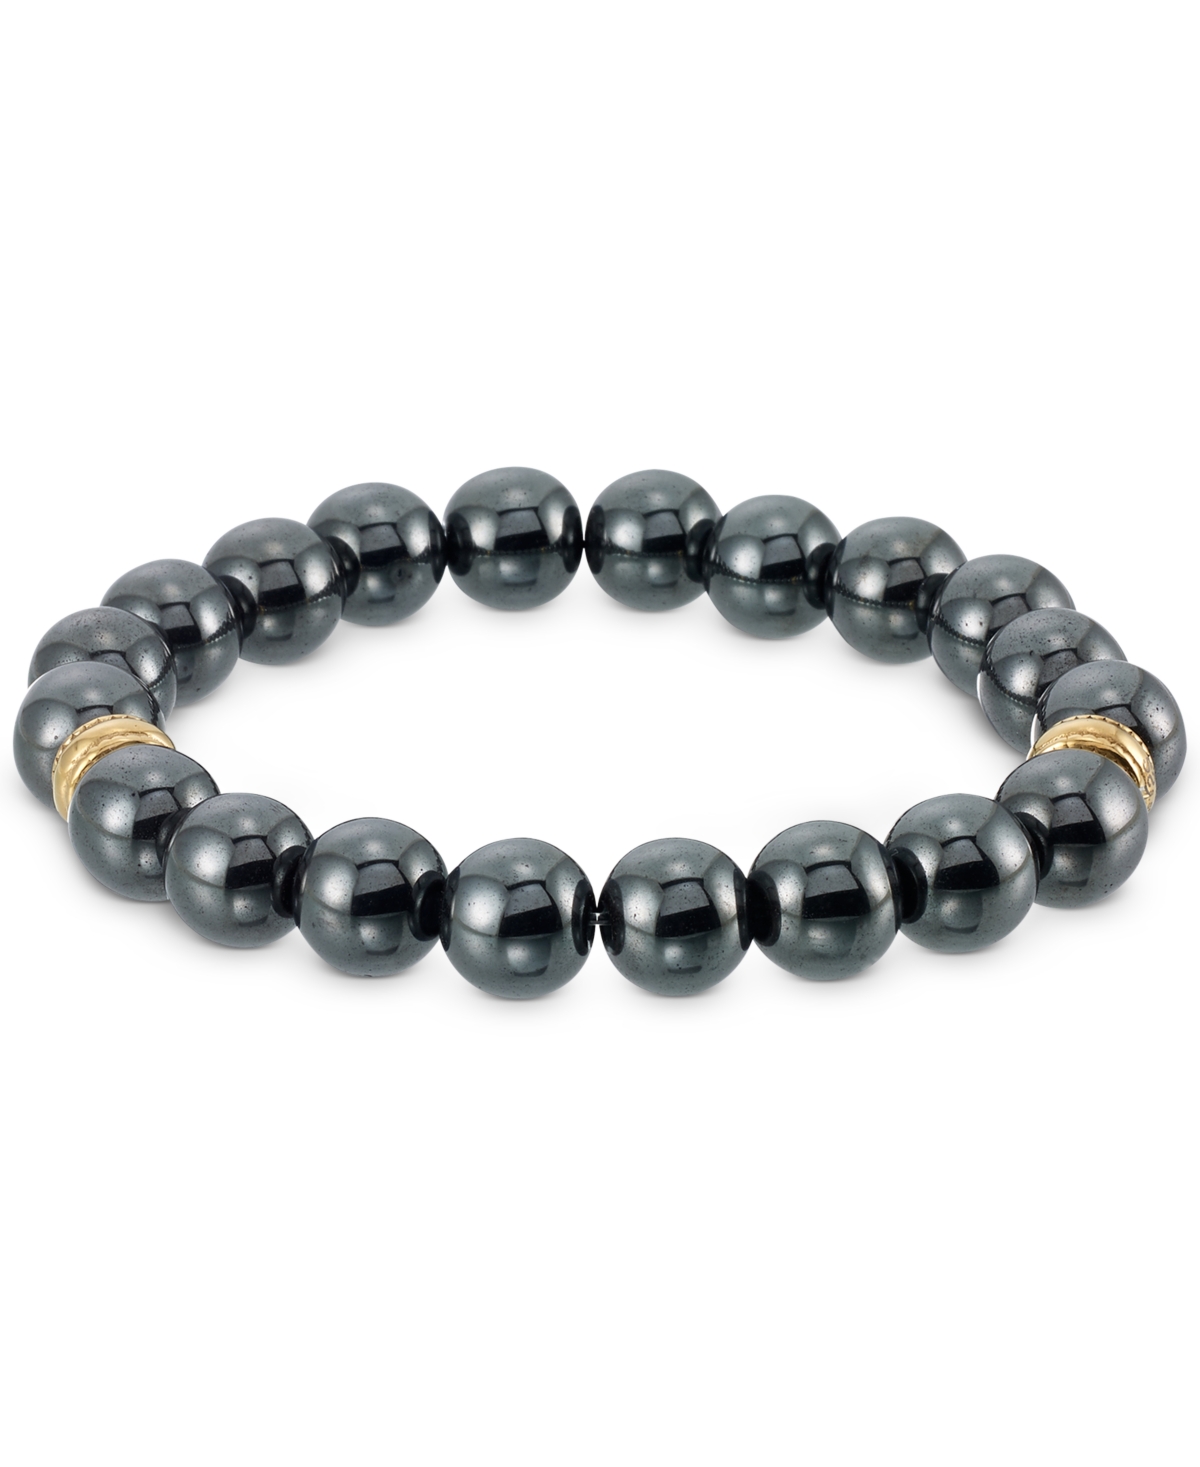 Smith Hematite Bead Stretch Bracelet in Gold-Tone Ion-Plated Stainless Steel - Black